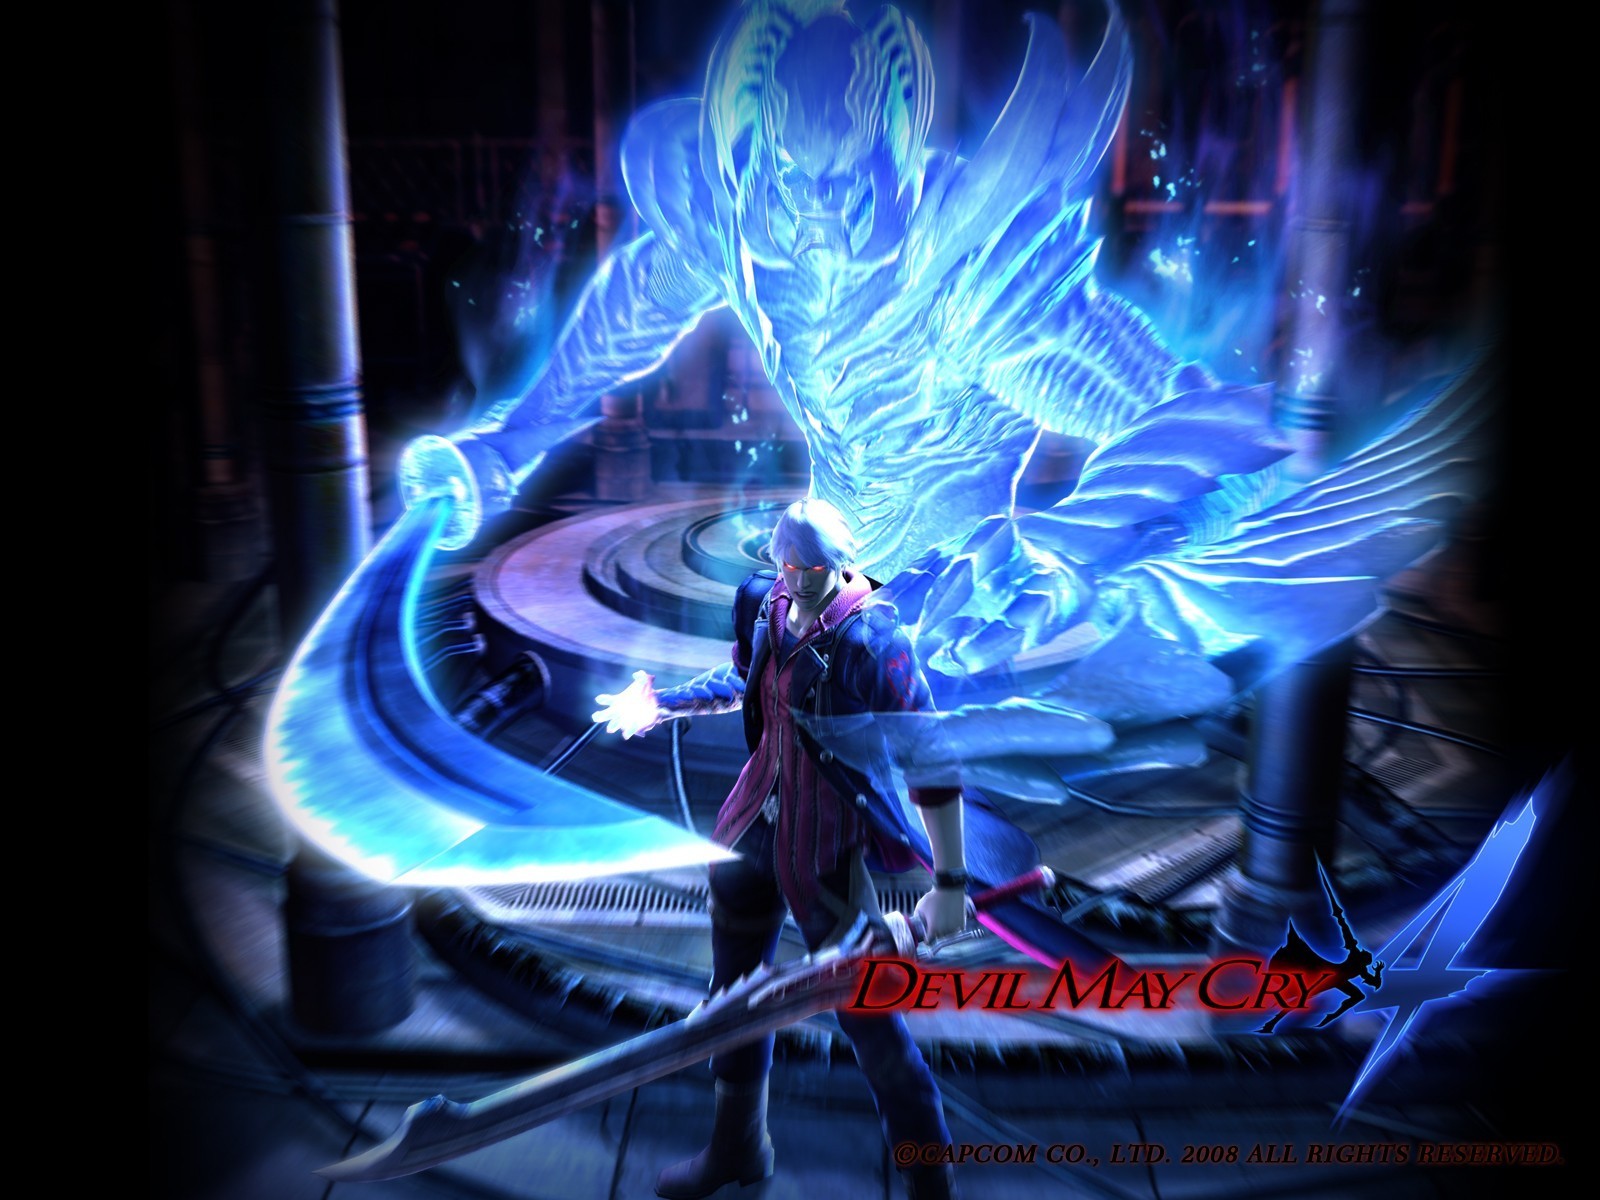 Devil May Cry 4 images Devil May Cry 4 wallpaper photos 10480378